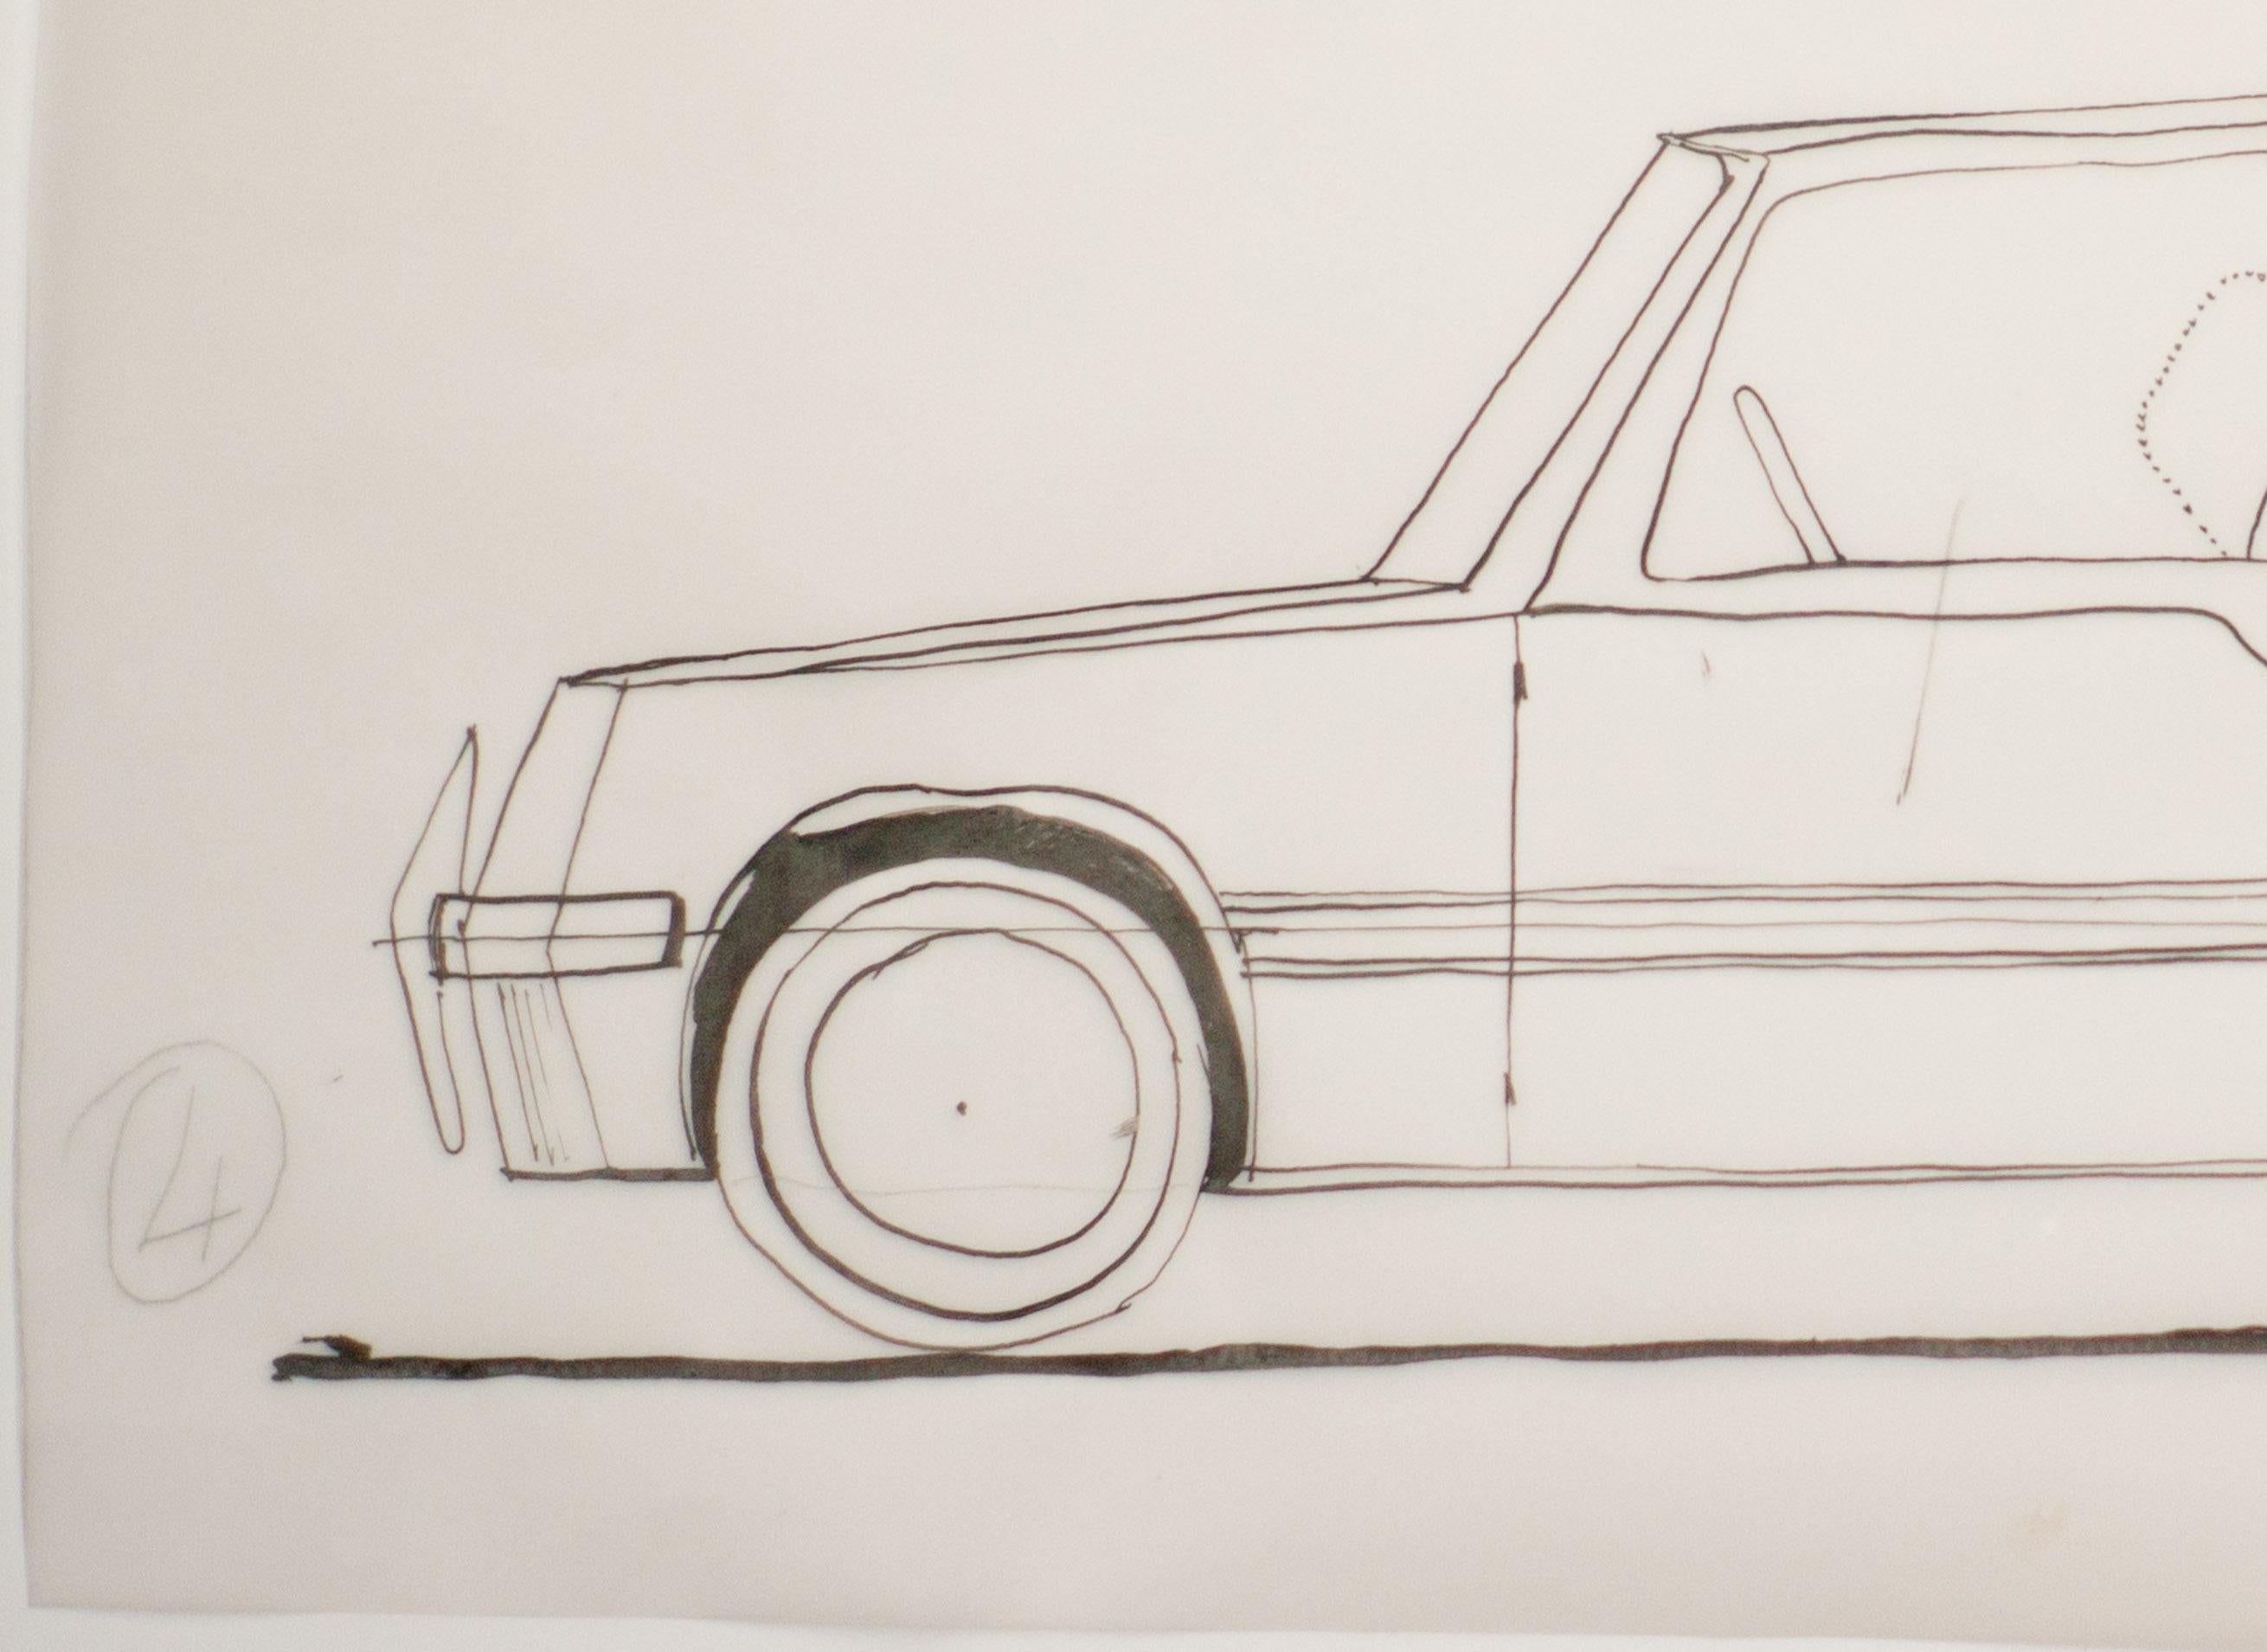 Important drawing by Gio Ponti of the Diamante line for Touring Carrozzeria Milan.
A similar example pictured on page 167 of Gio Ponti: The Complete Work by Lisa Ponti. 
Ponti's car designs where never realized, but his design ideas where very